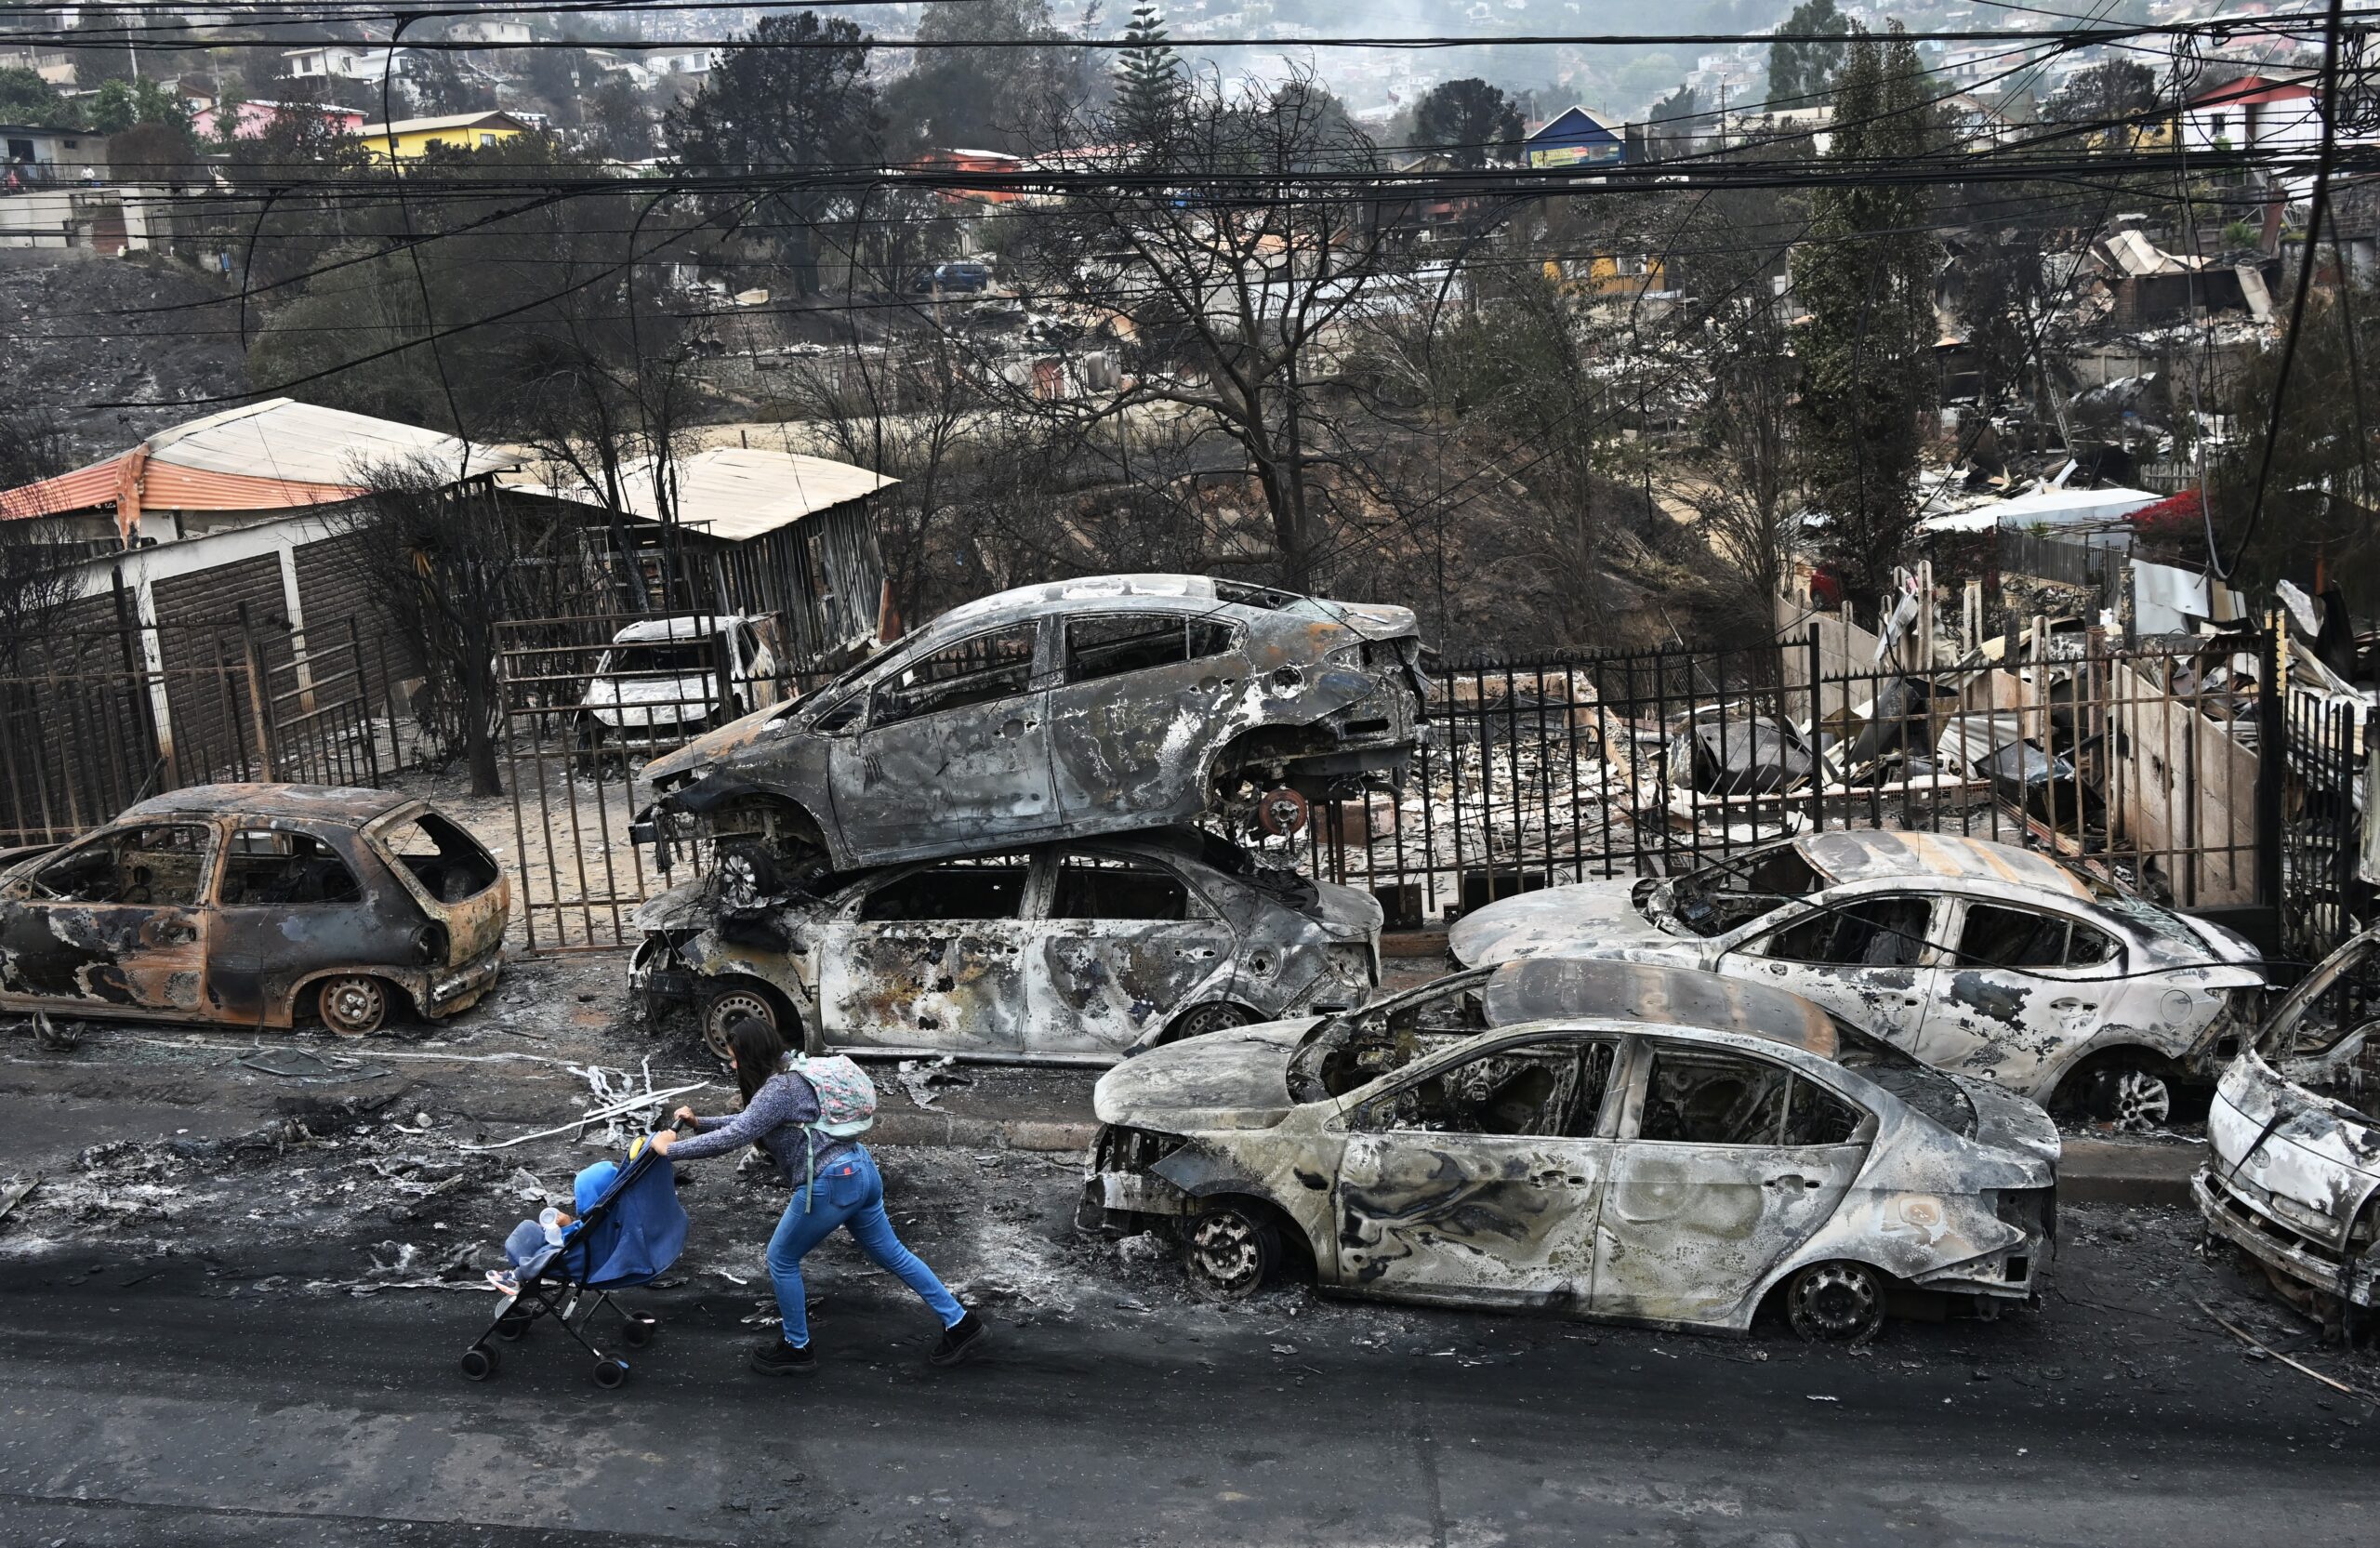 Chile firefighter accused in February blaze that killed 137